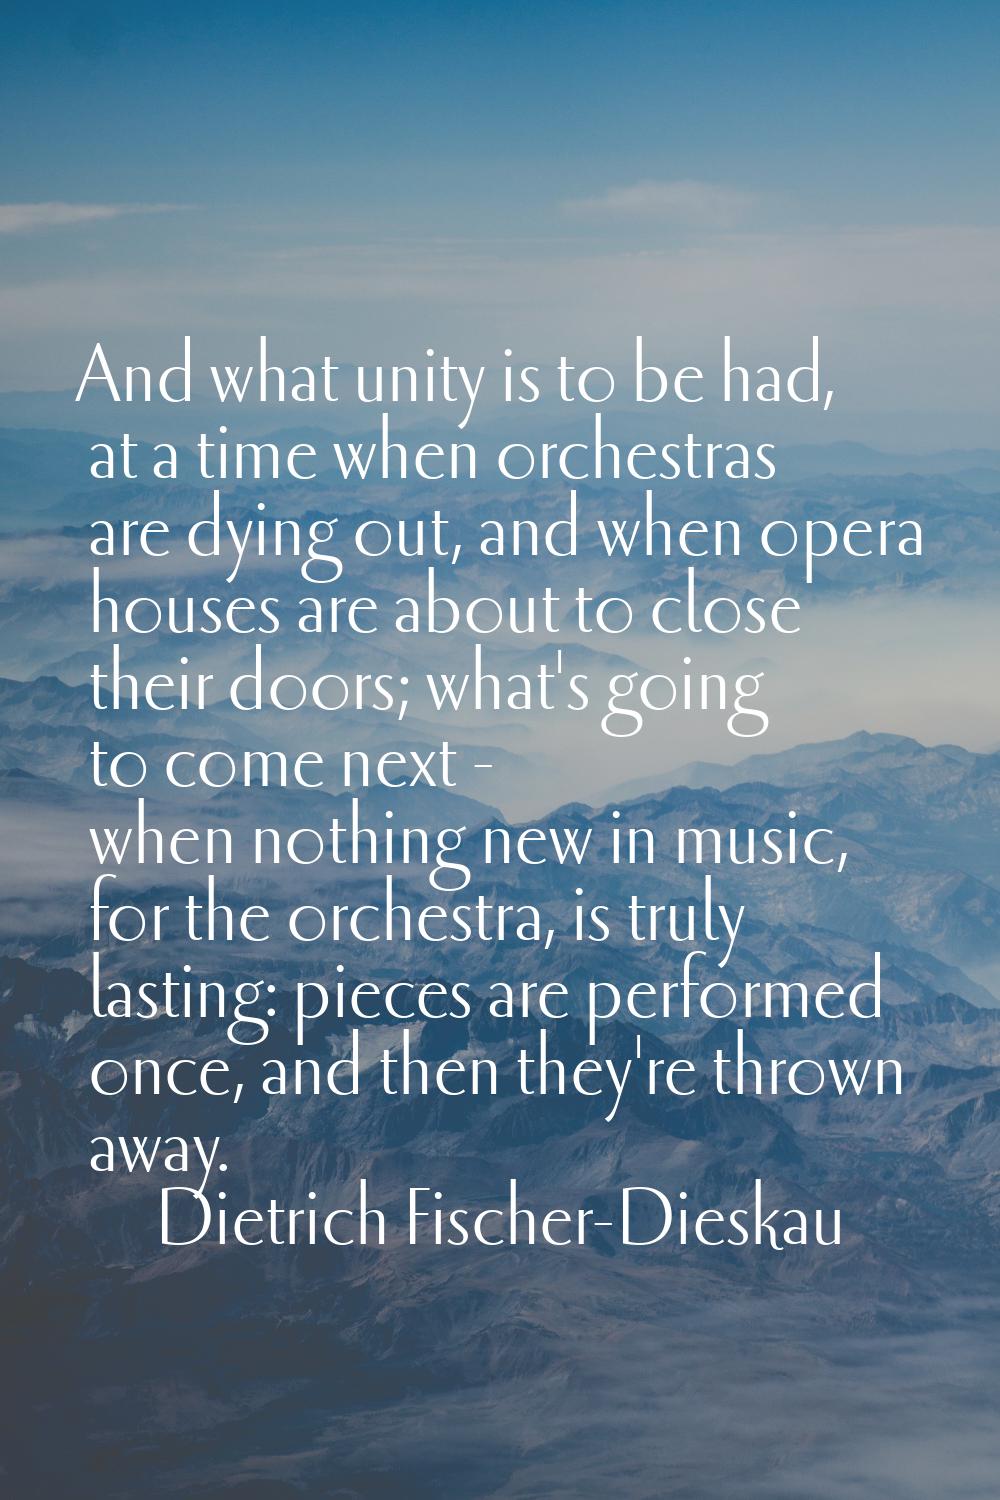 And what unity is to be had, at a time when orchestras are dying out, and when opera houses are abo